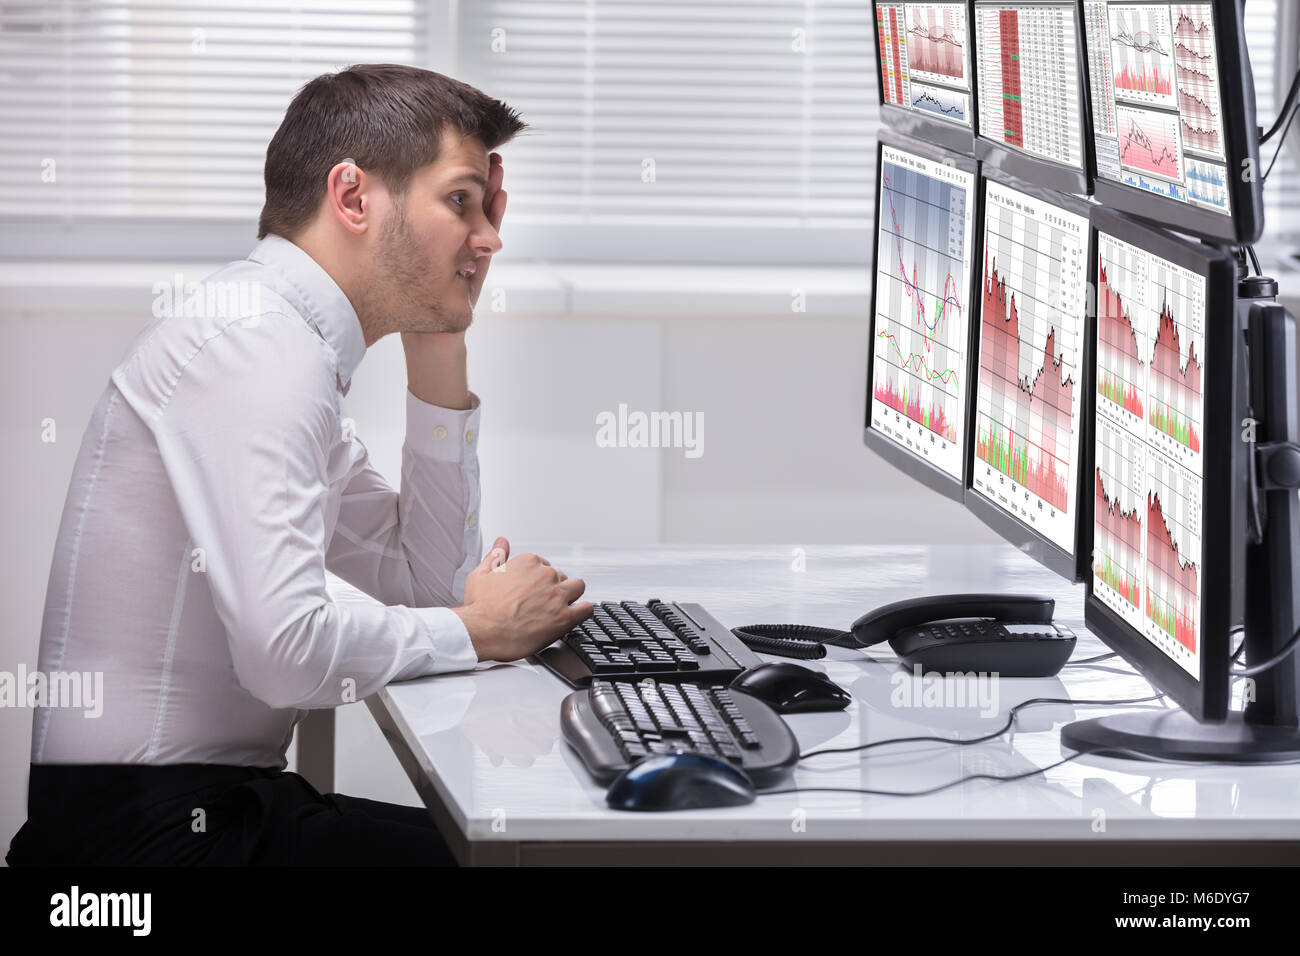 Side View Of A Stressed Young Male Operator Looking At Graphs On Multiple Computer Screens Stock Photo